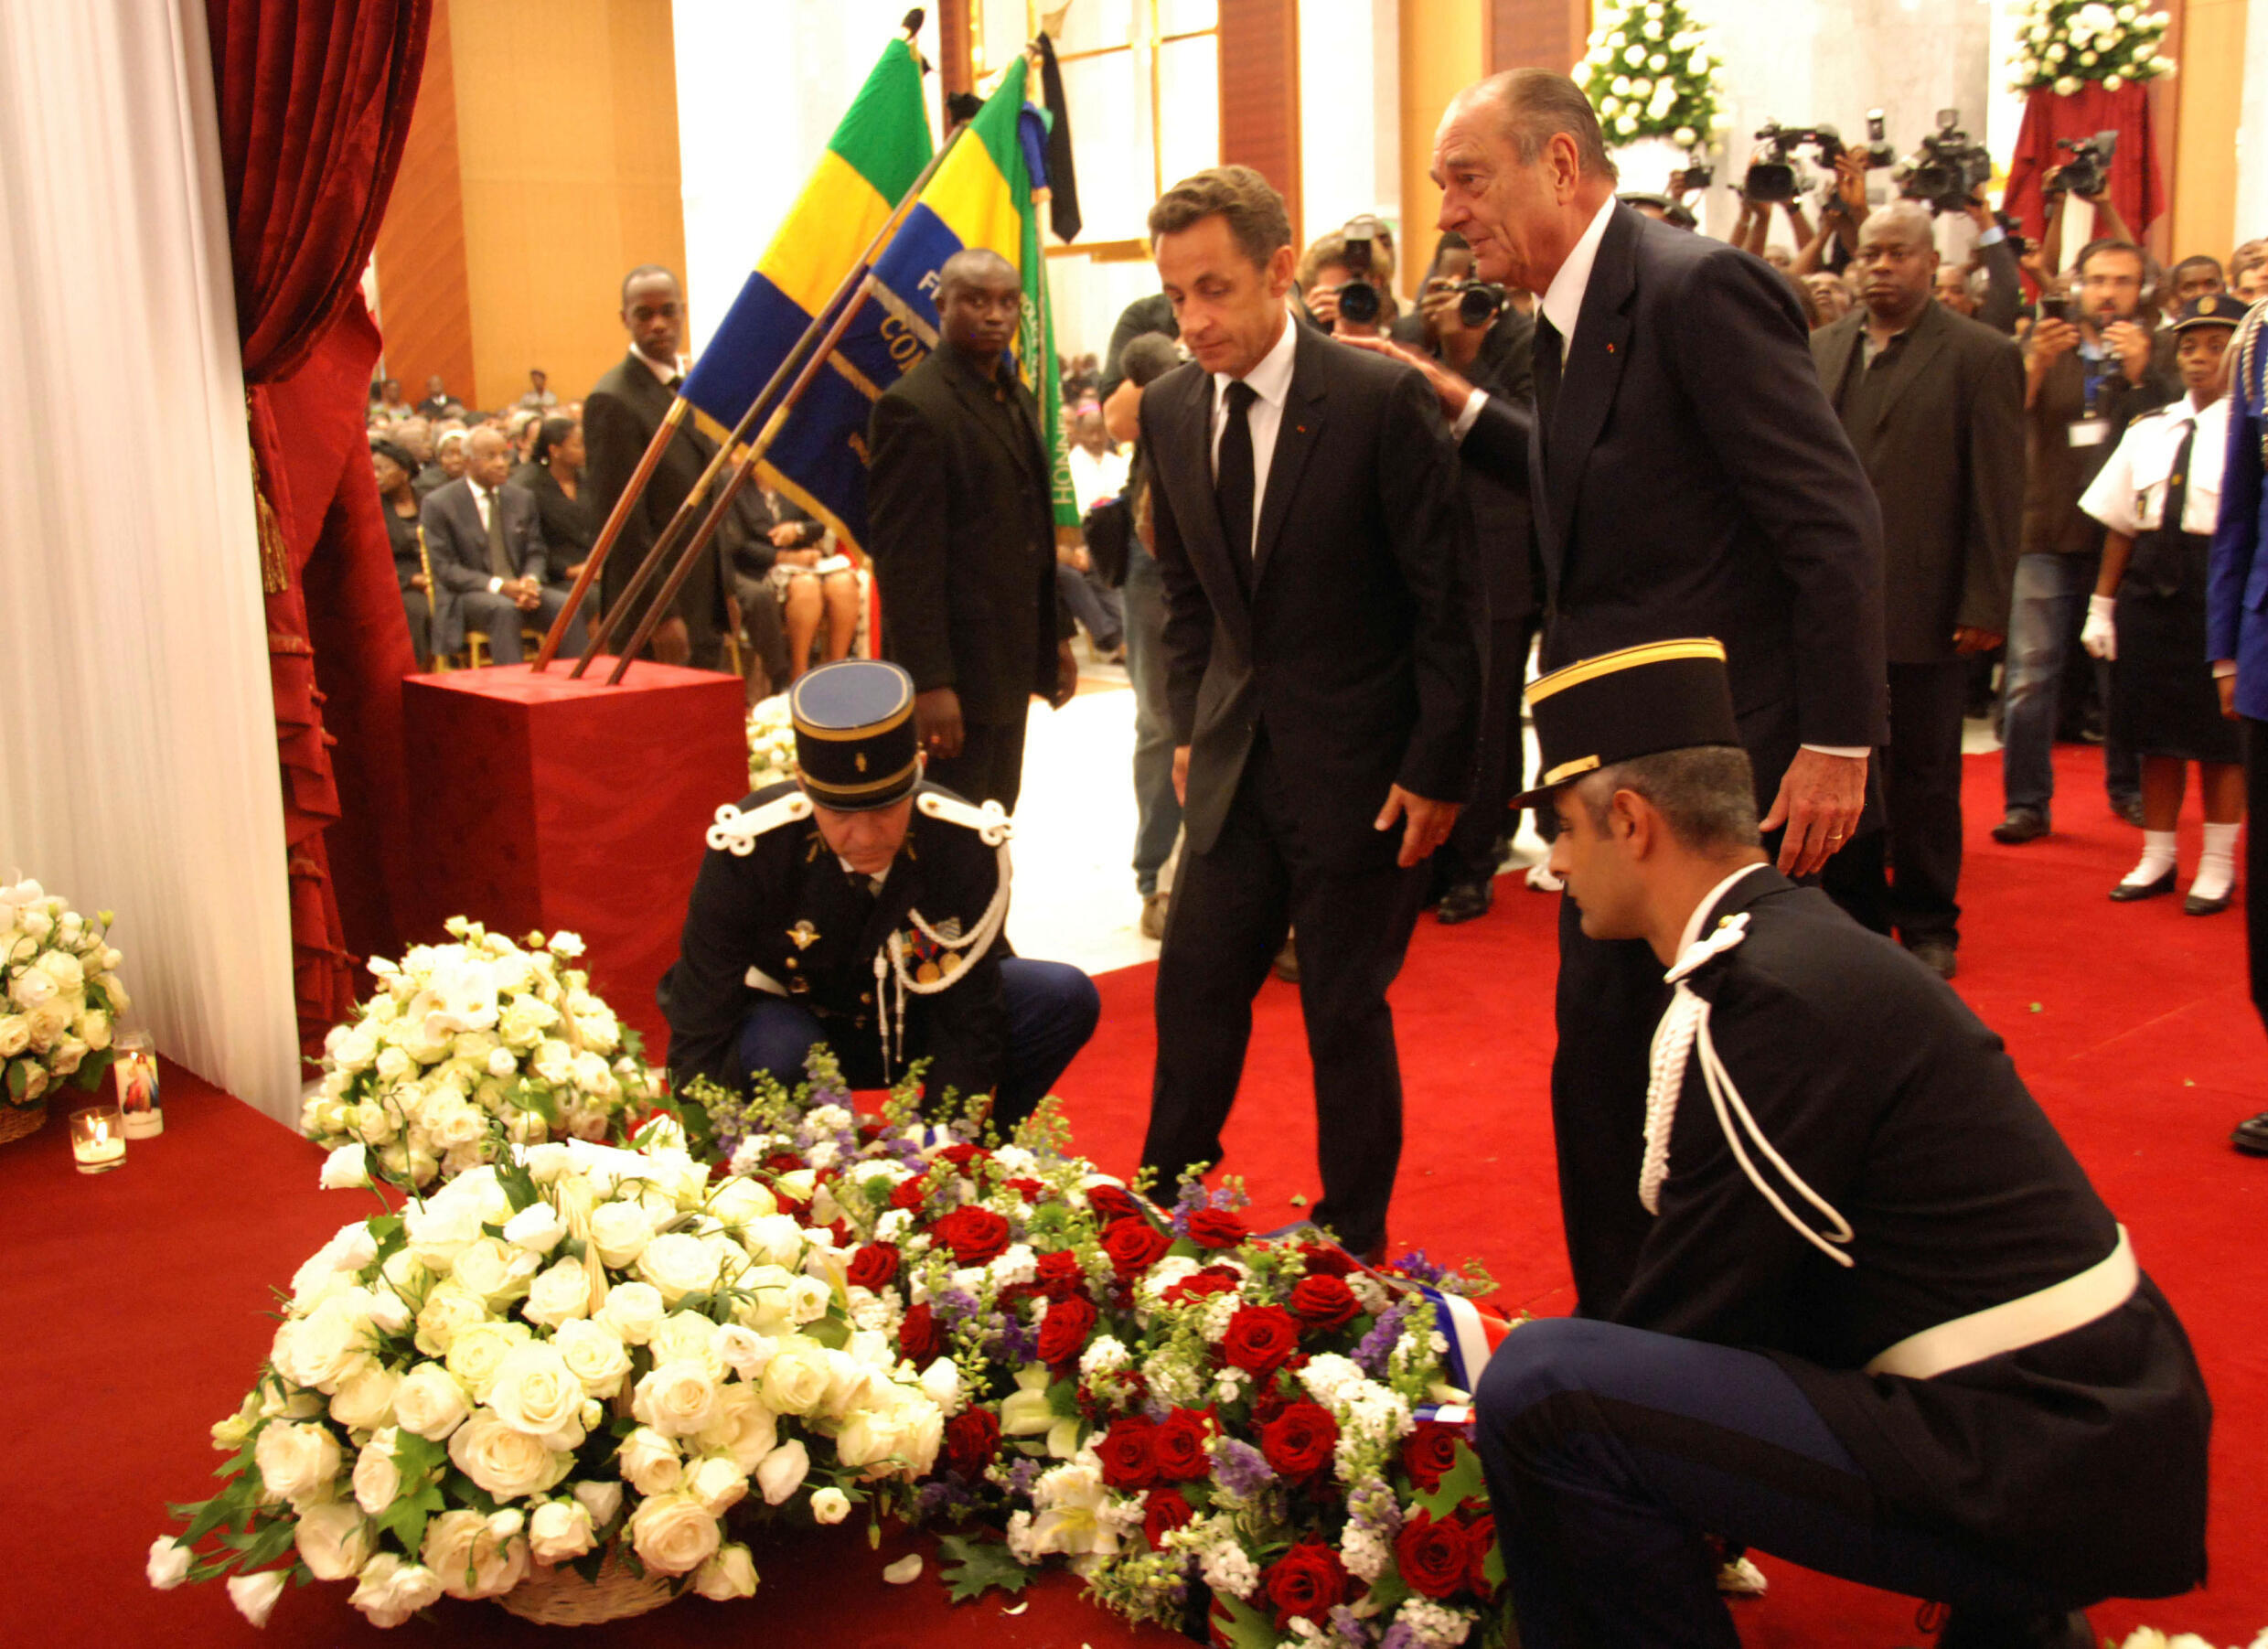 French President Nicolas Sarkozy, center, and his predecessor Jacques Chirac, right, lay flowers in front of the coffin of late Gabonese President Omar Bongo at the presidential palace in Libreville, Gabon June 16, 2009.